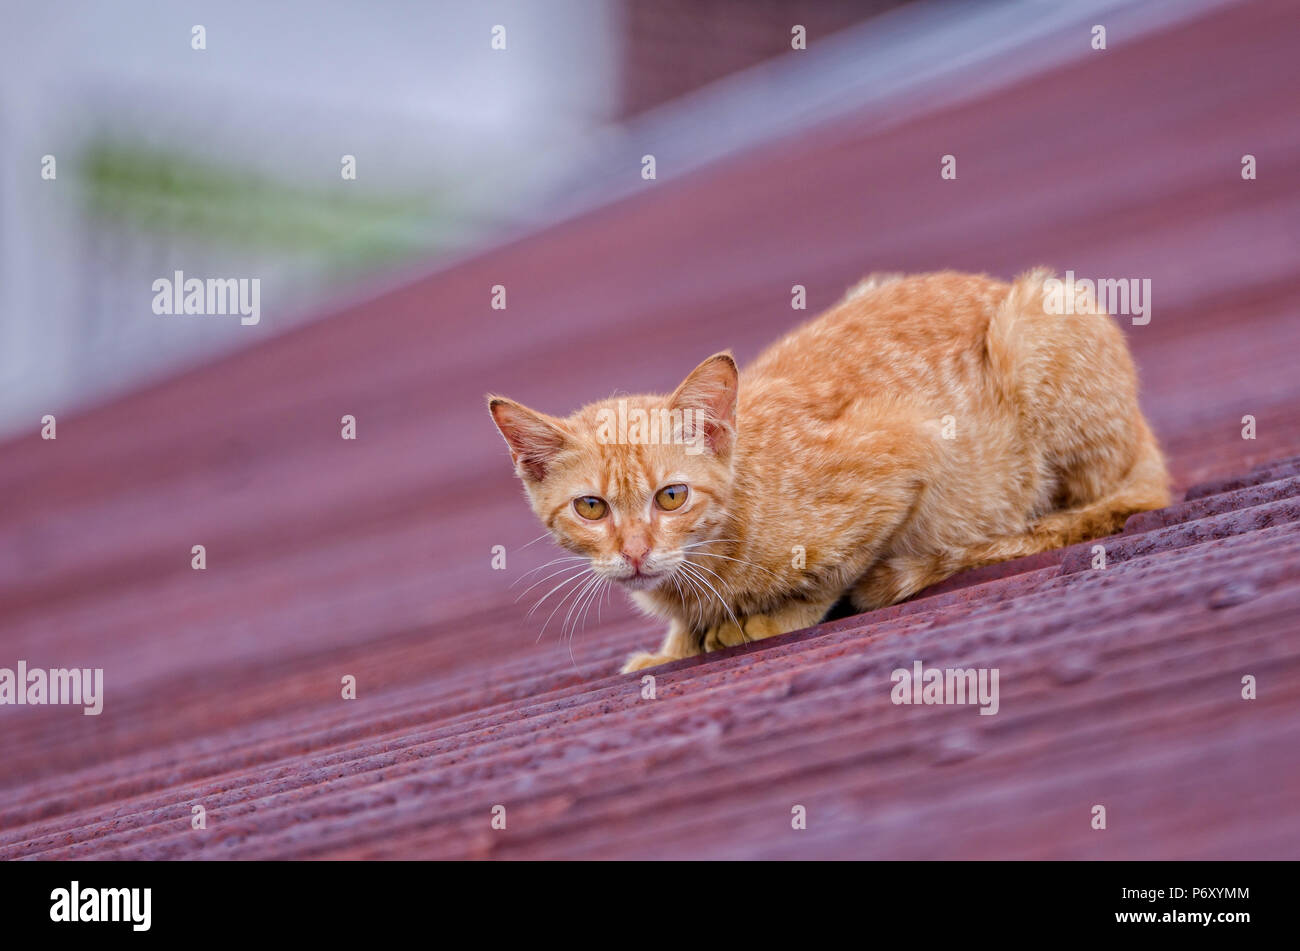 Little cat on the corrugated roof. Stock Photo